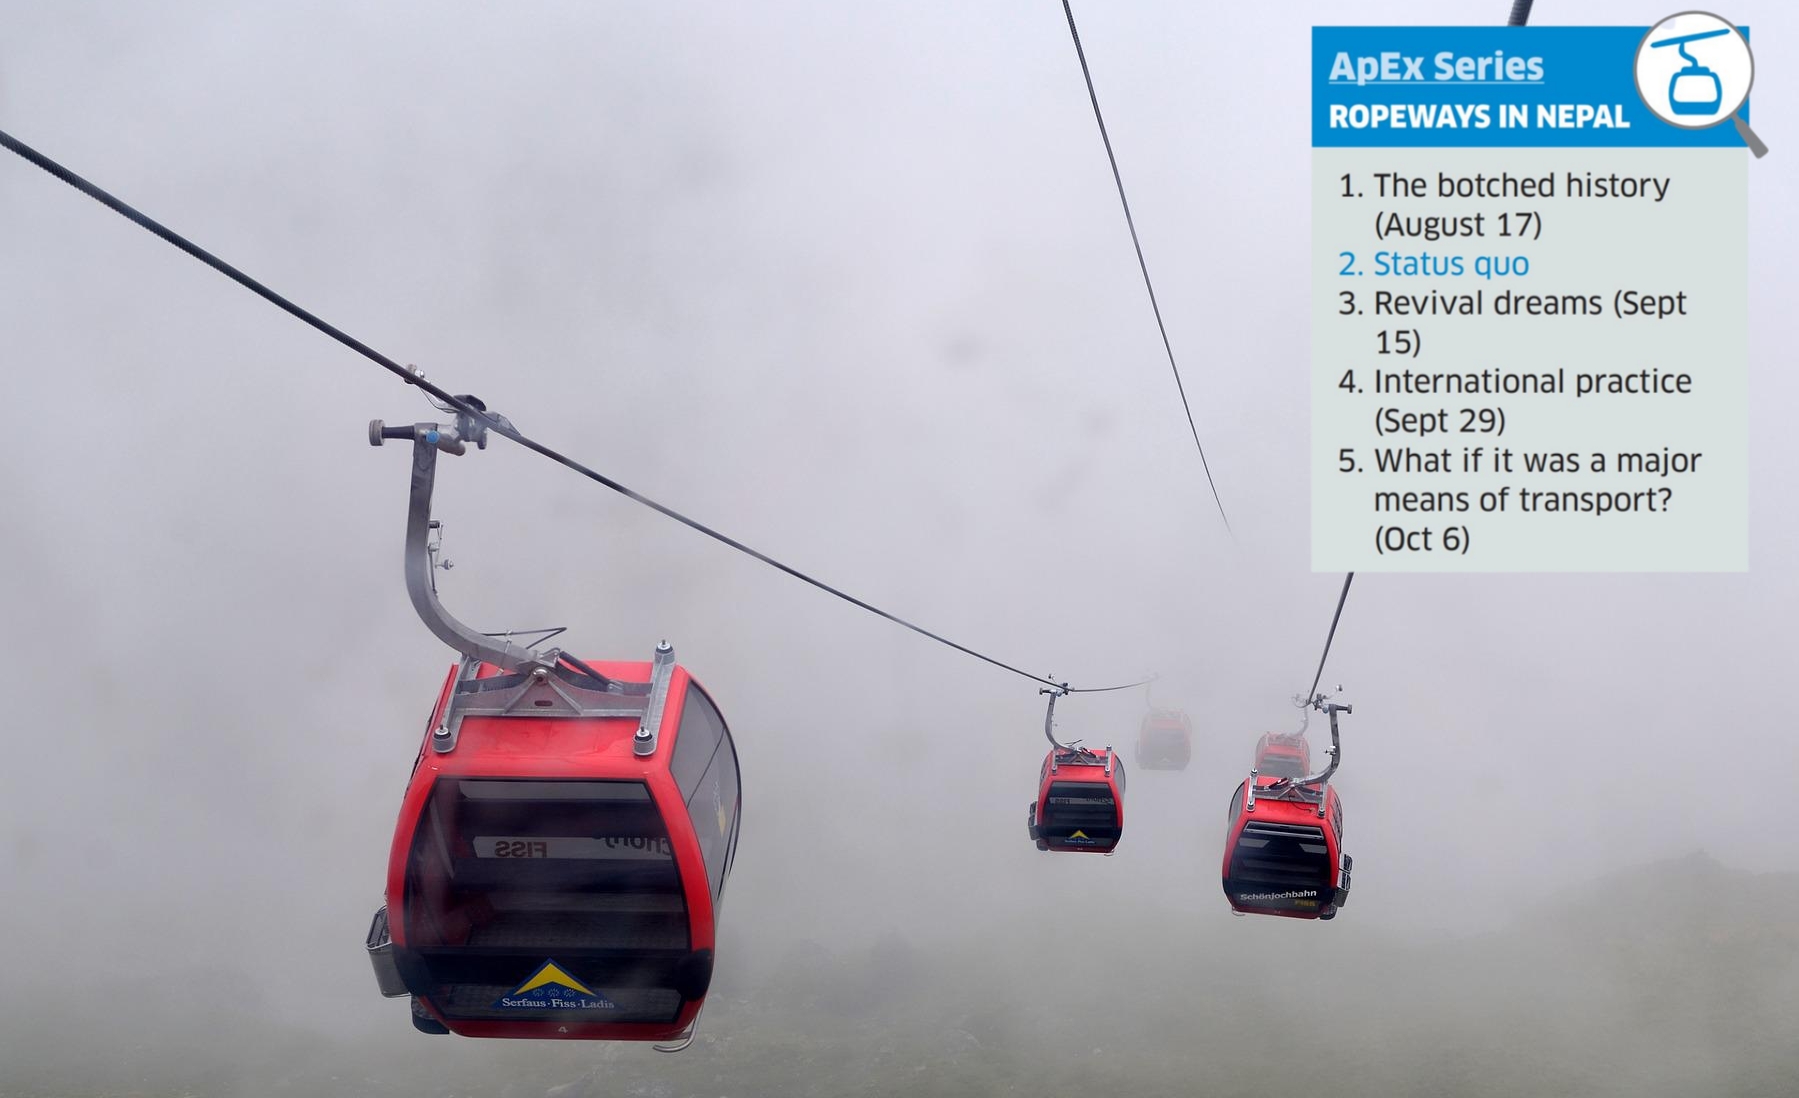 ApEx Series: Let there be ropeways